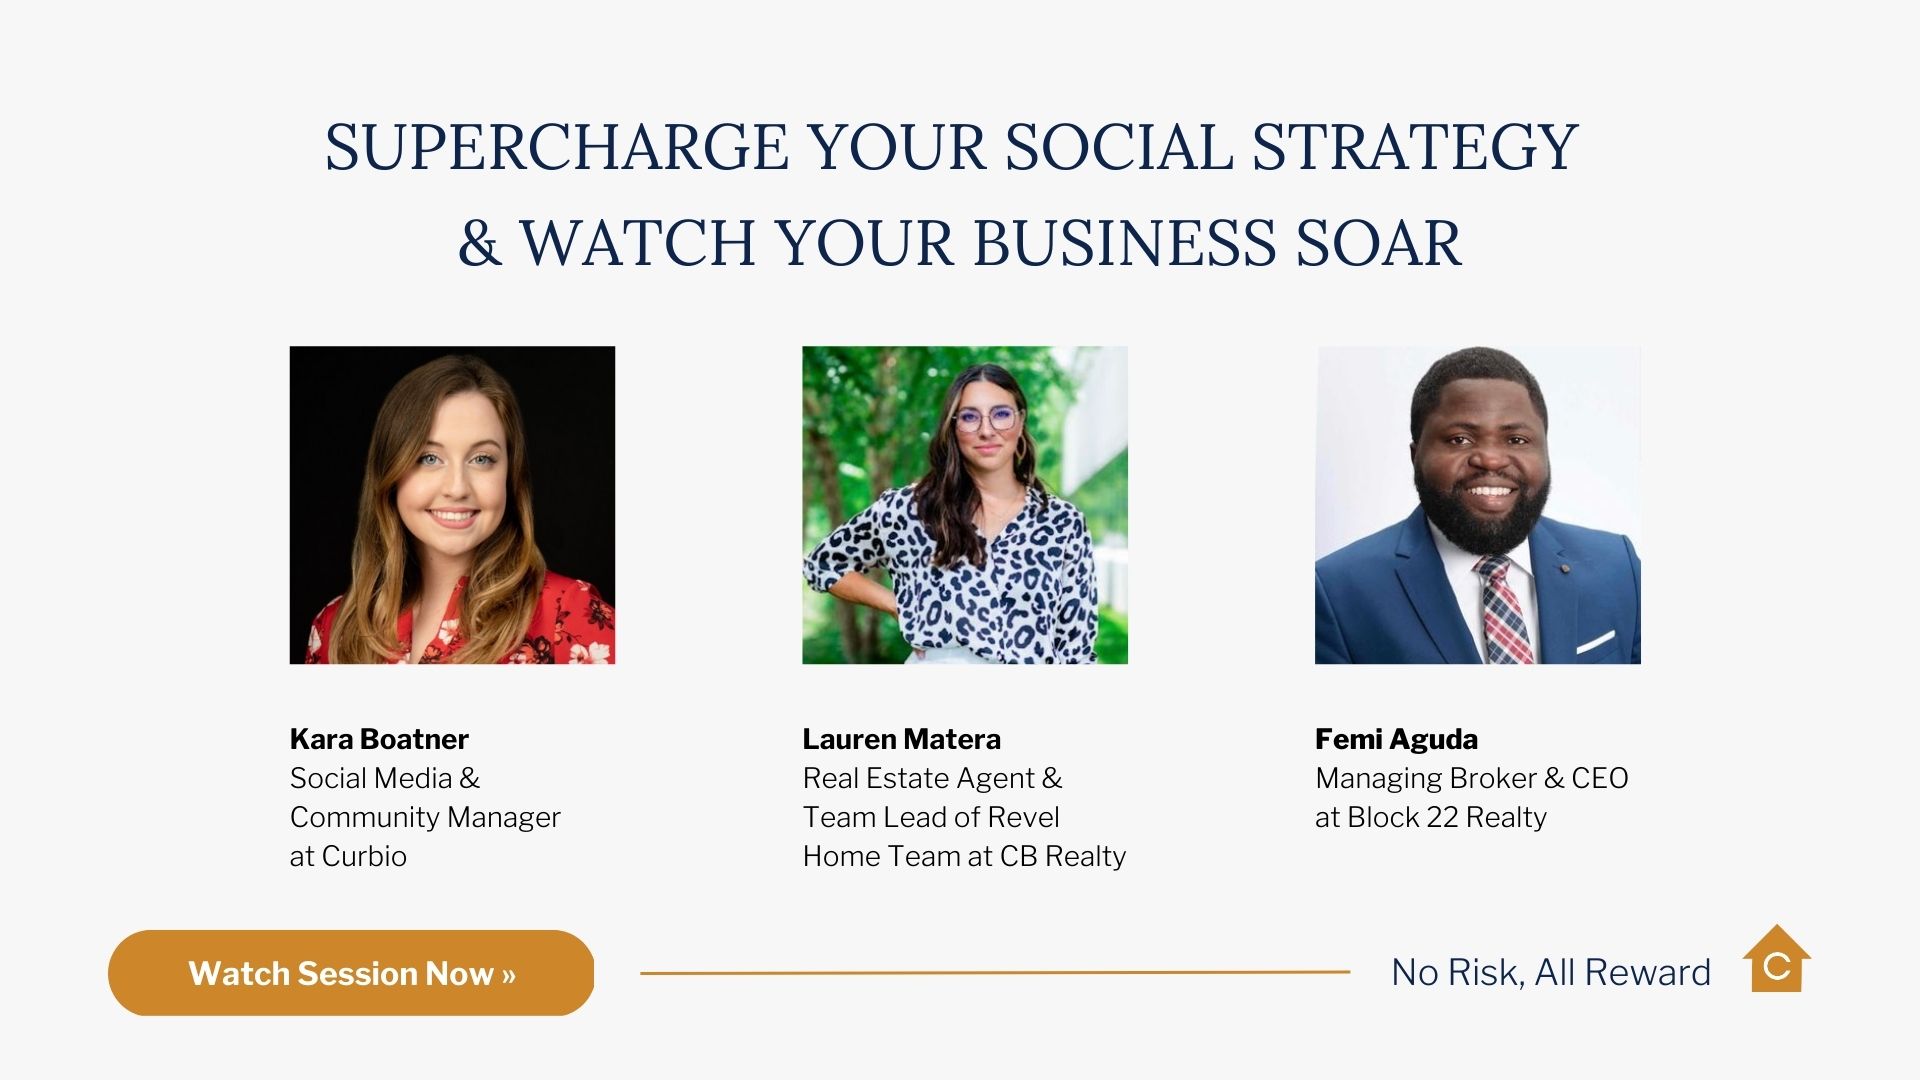 Supercharge Your Social Strategy & Watch Your Business Soar